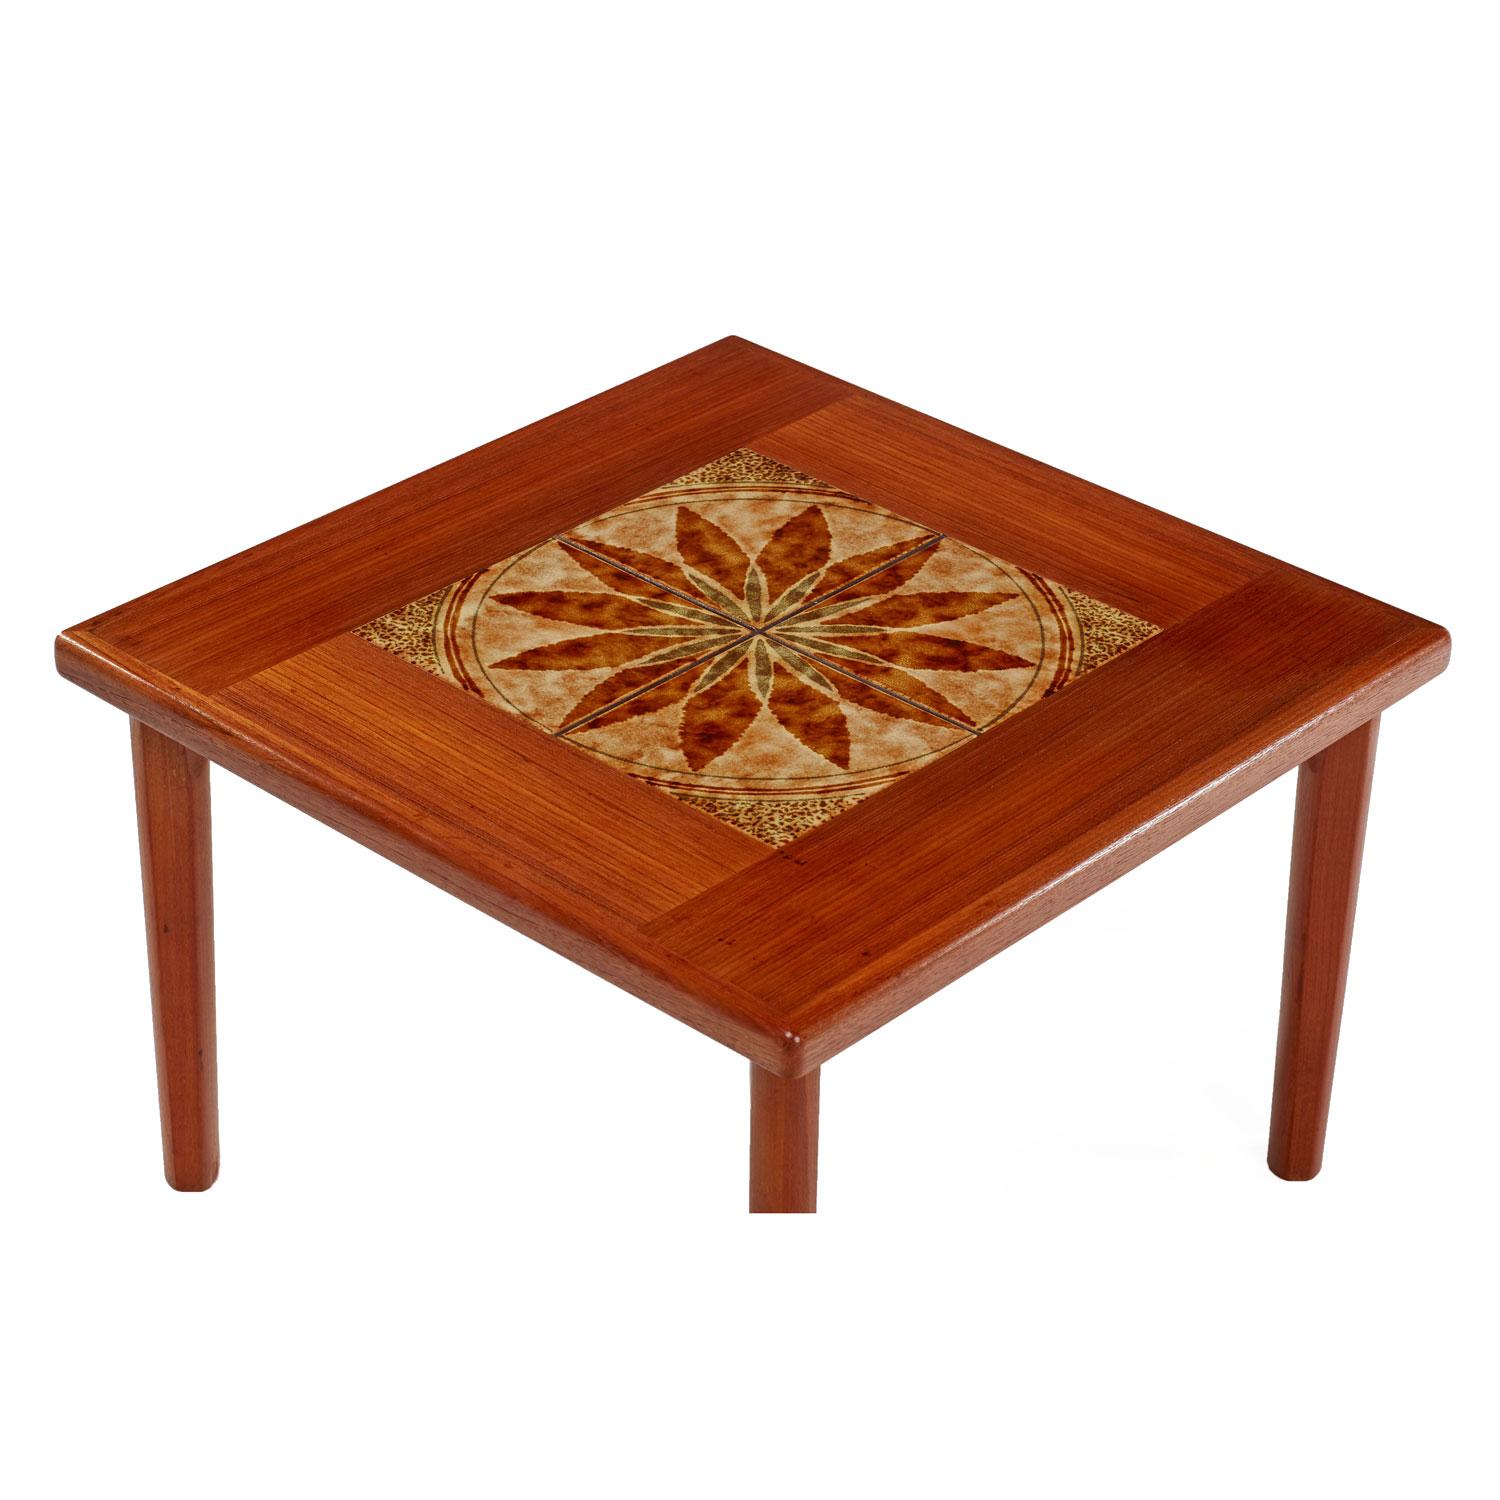 Danish teak end table made by BRDR Furbo. Rich, dark amber patina and stunning cathedral grain teak. We’ve never seen a tile top Danish teak end table with this unique design. The marijuana-like leafs are laid out in a sunburst pattern and have a